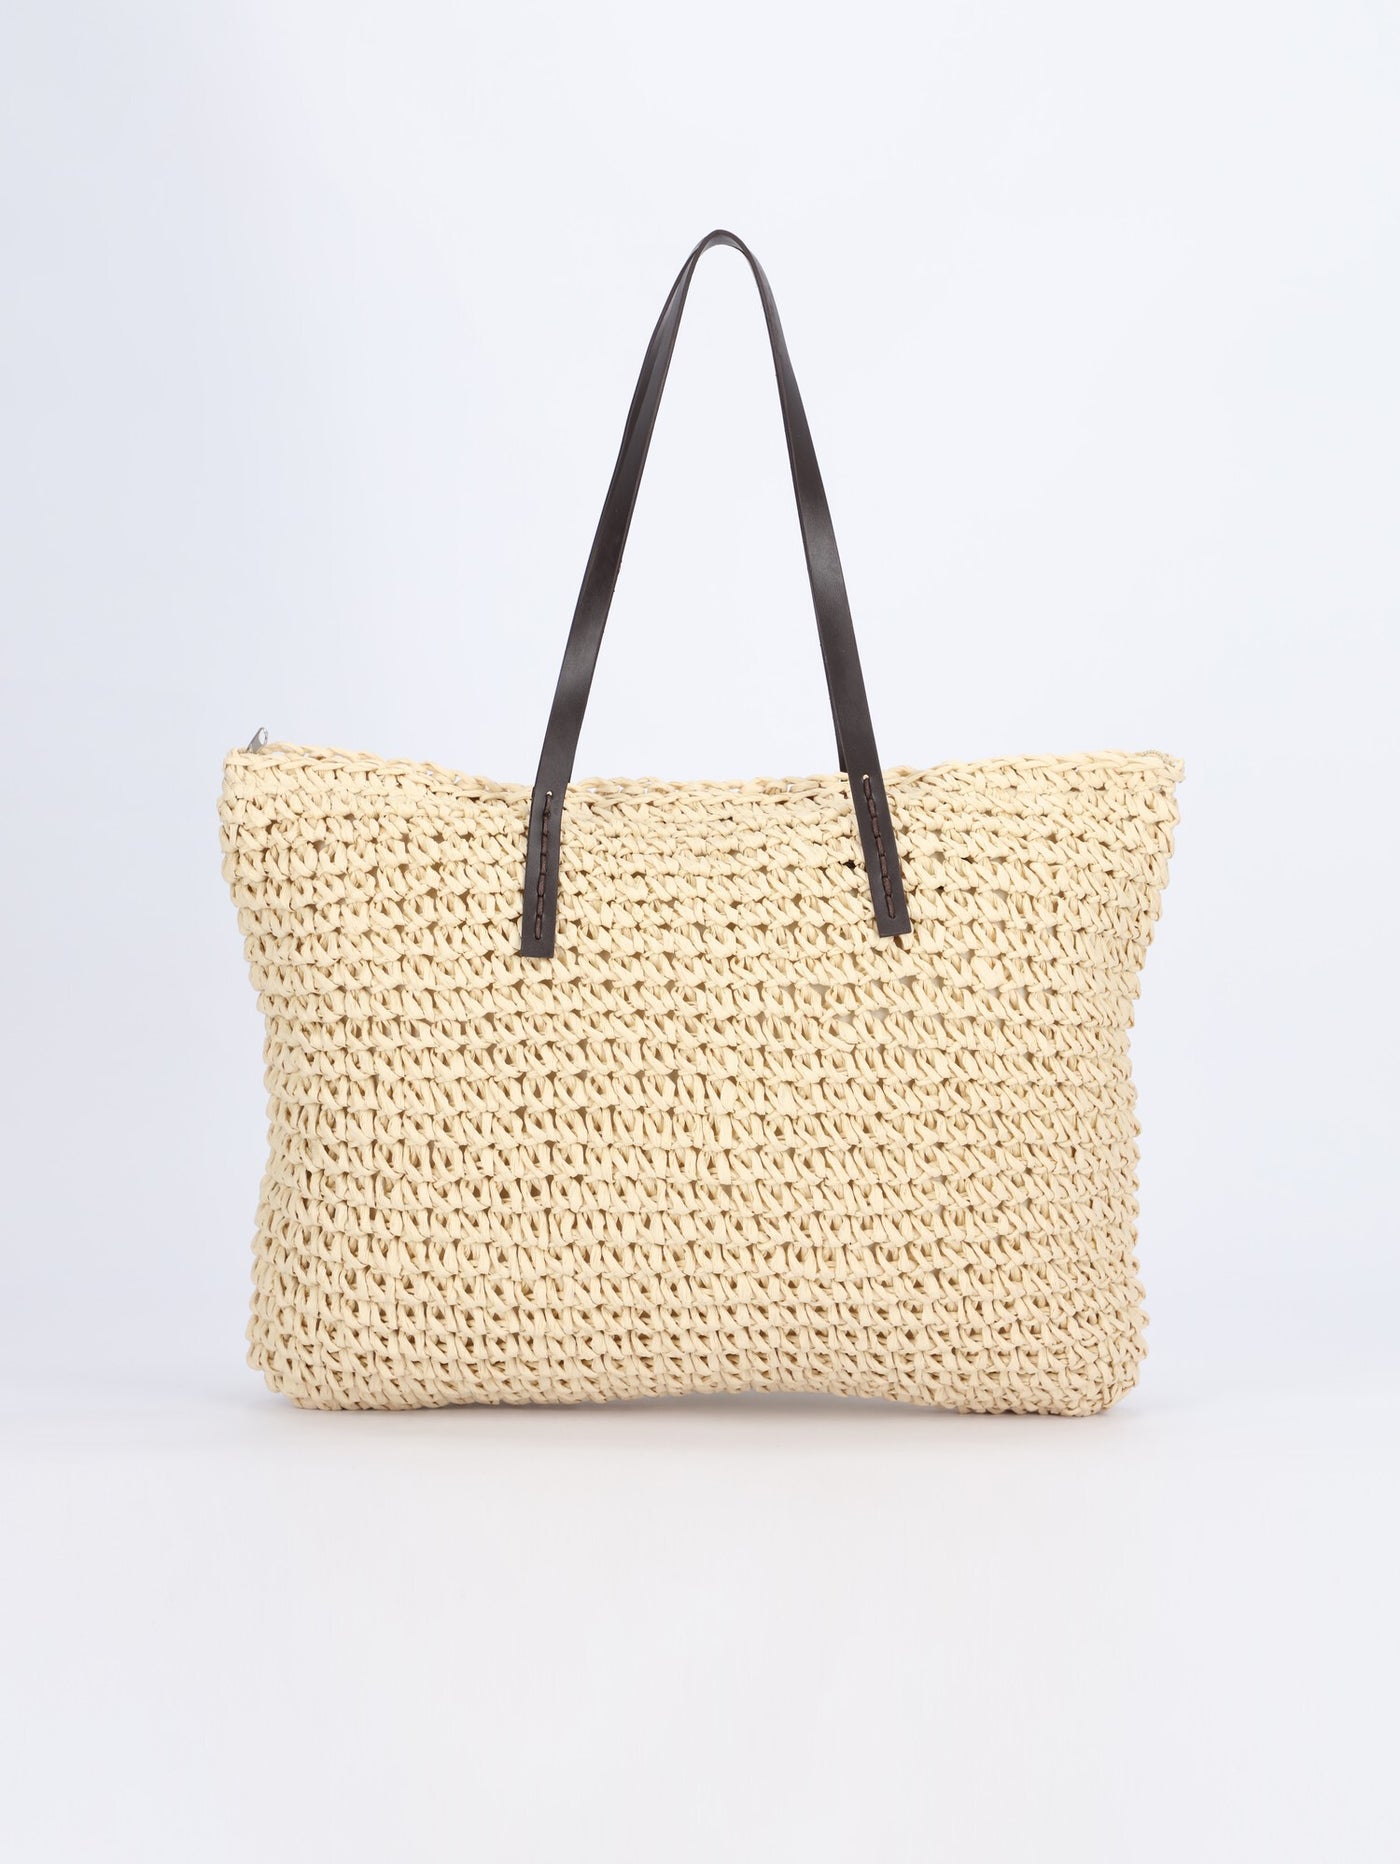 Straw Tote Handbag with Leather Handles